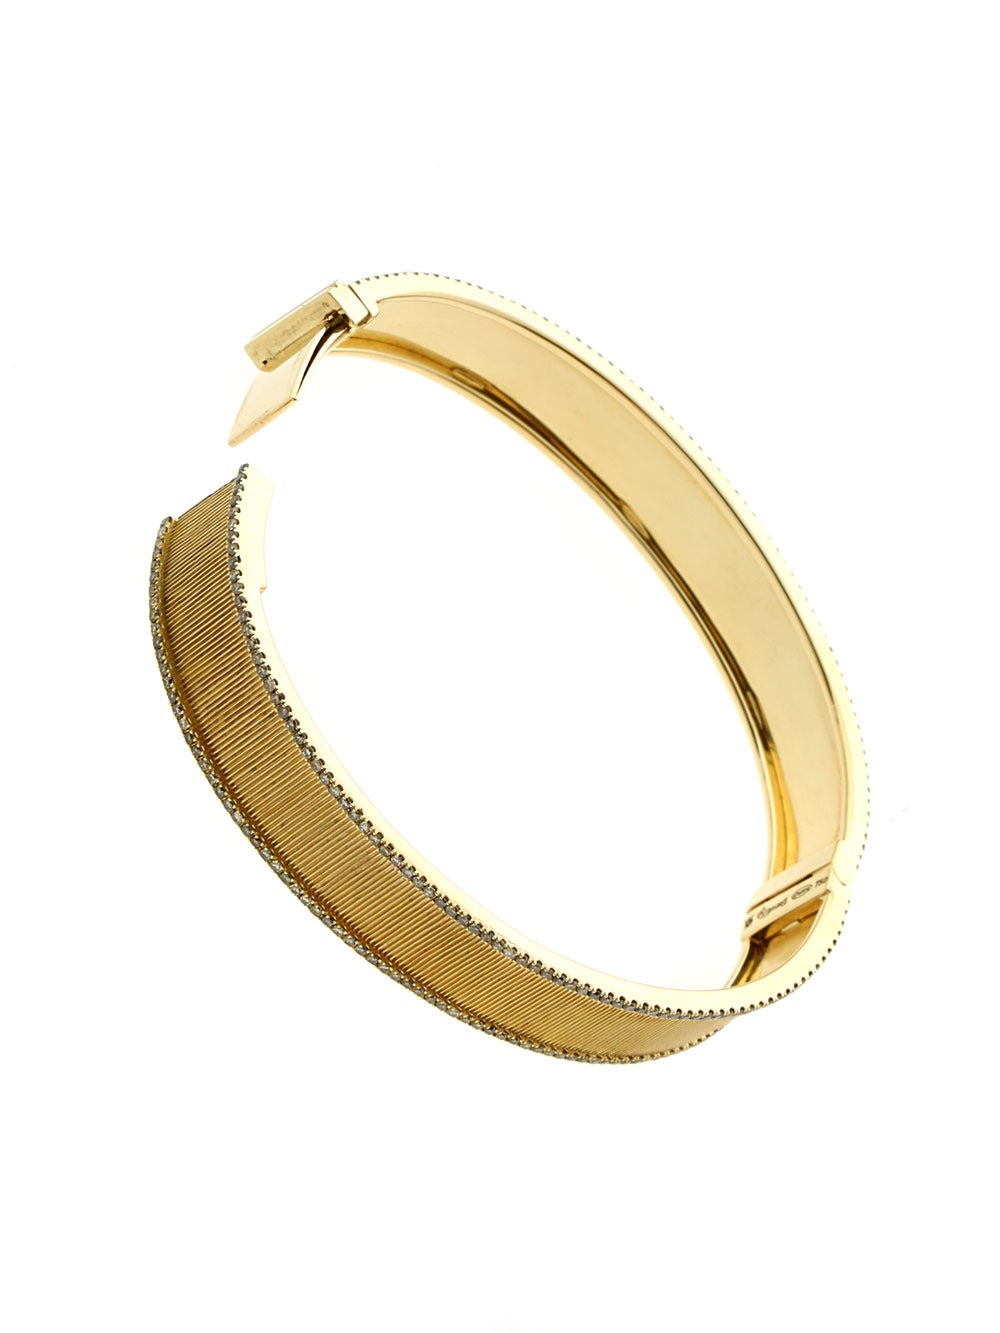 A hand engraved bangle bracelet created in 18k yellow gold featuring 1.5ct of round brilliant cut brown diamonds with a total weight of 36.5 grams.

The bangle measures 11mm wide and will fit a wrist up to 6